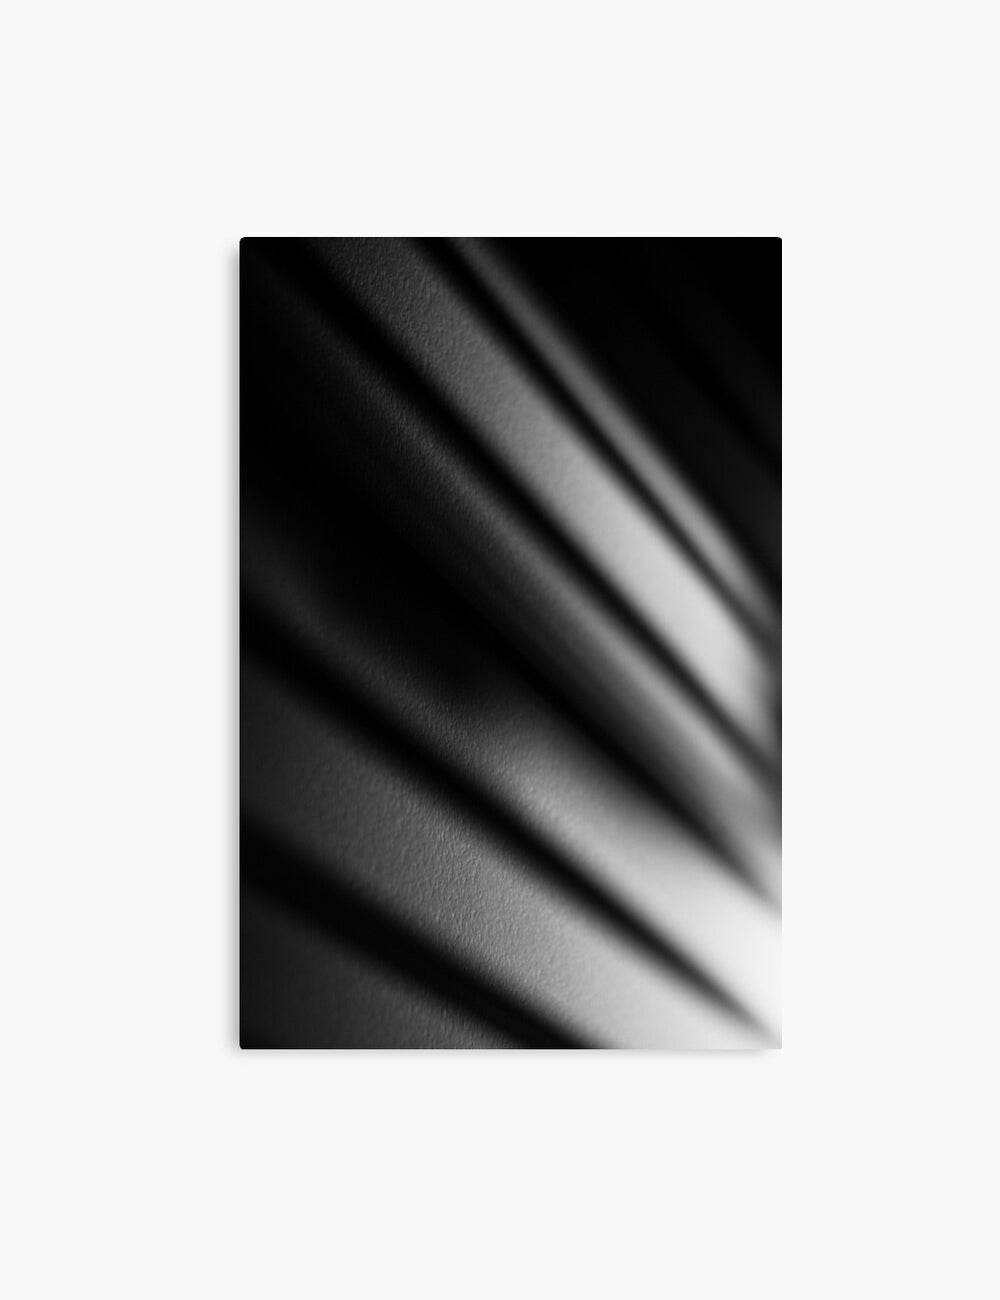 LIGHT AND SHADOW. Black and white photography. Abstract, minimalist printable wall art. LIGHT AND SHADOW canvas print. - PAPER MOON Art & Design